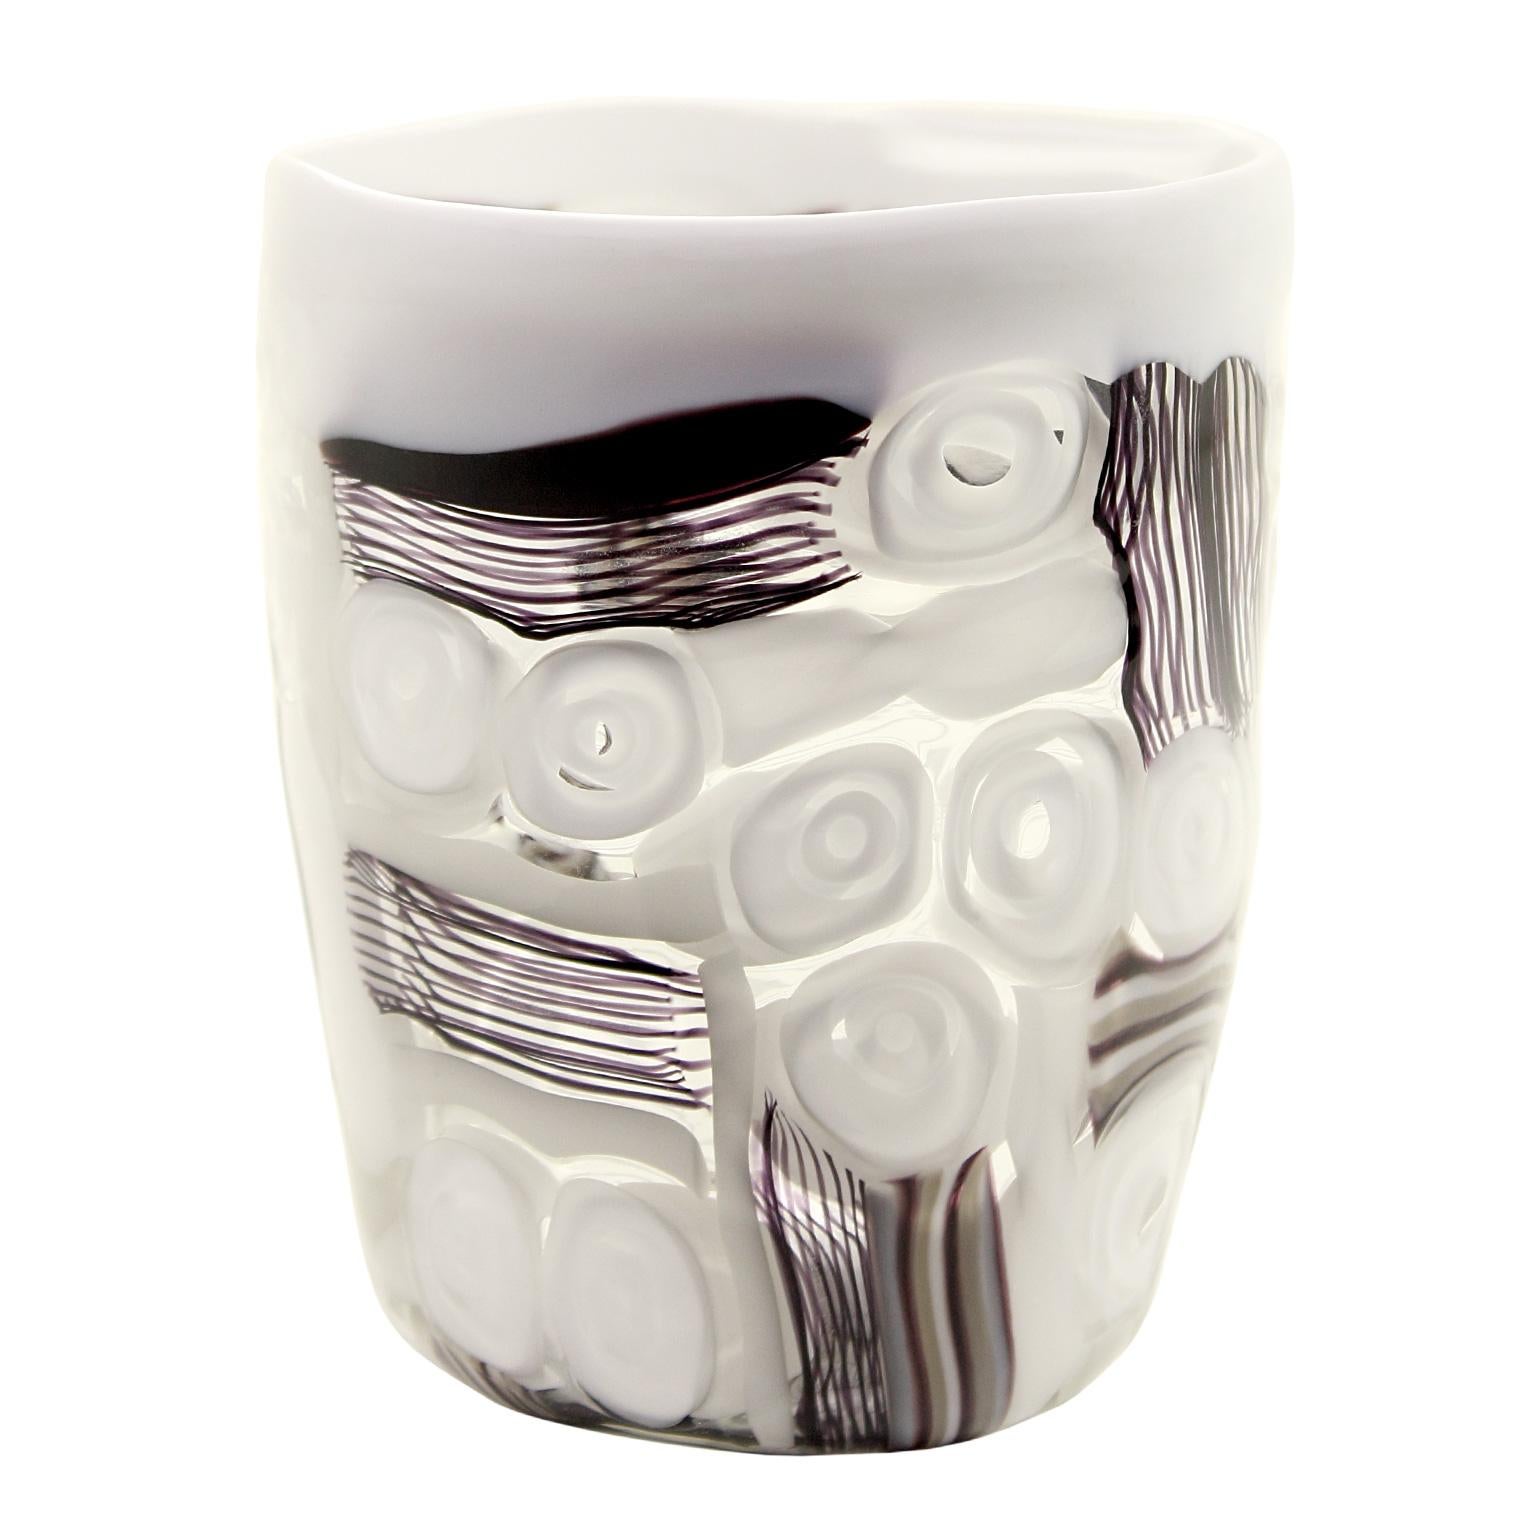 These artistic glasses are handmade by the master artisan using murrine, filigrana, zanfirico, reticello and has white grey black shades. Every piece differs one from the other and has a unique combination of these materials.

Precious pieces that